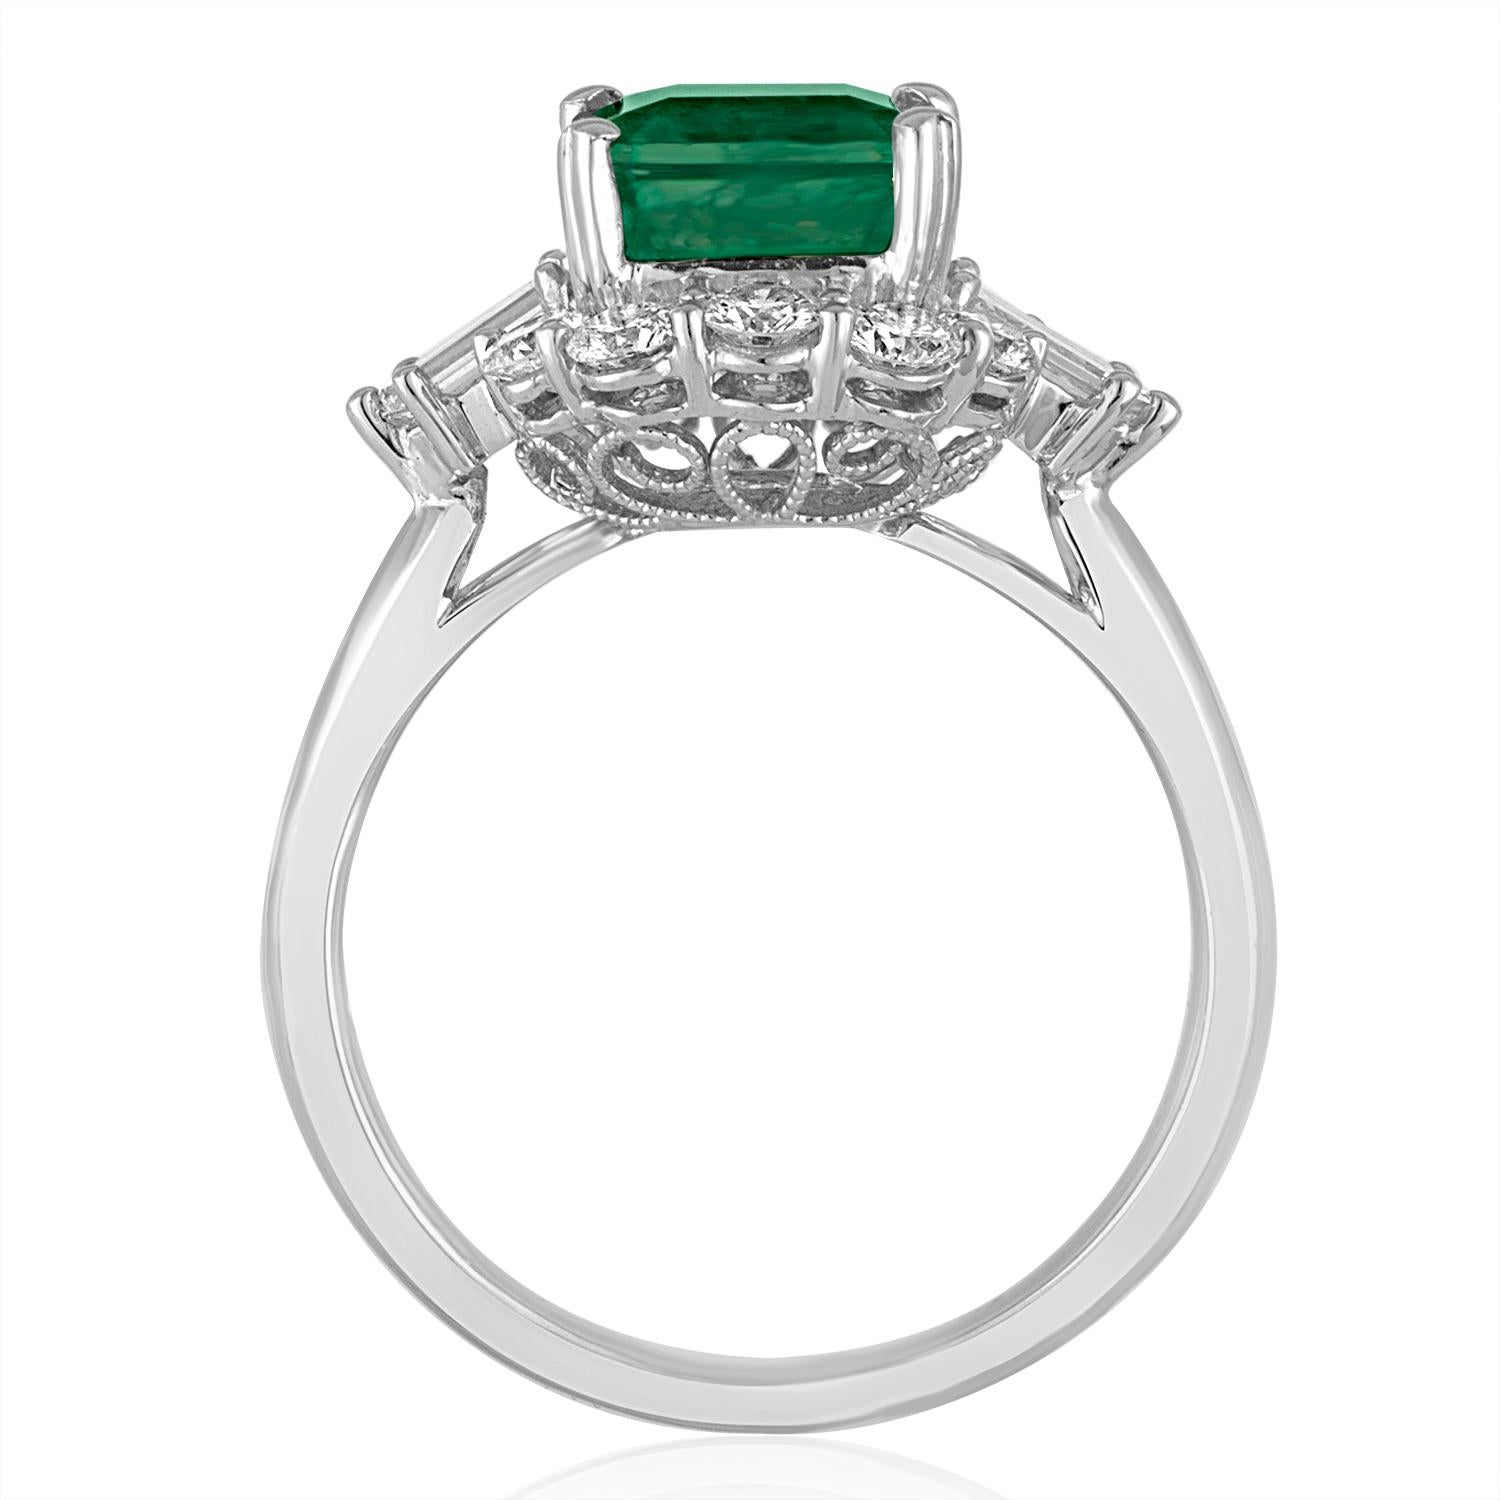 Beautiful Emerald Halo Ring
The ring is 18K White Gold.
The Center is a beautiful 2.49 Carat Emerald.
The Emerald is AGL certified, oil treatment only.
The Emerald is surrounded by Diamonds.
There are 0.97 Carats Diamonds F/G VS/SI
The ring is a